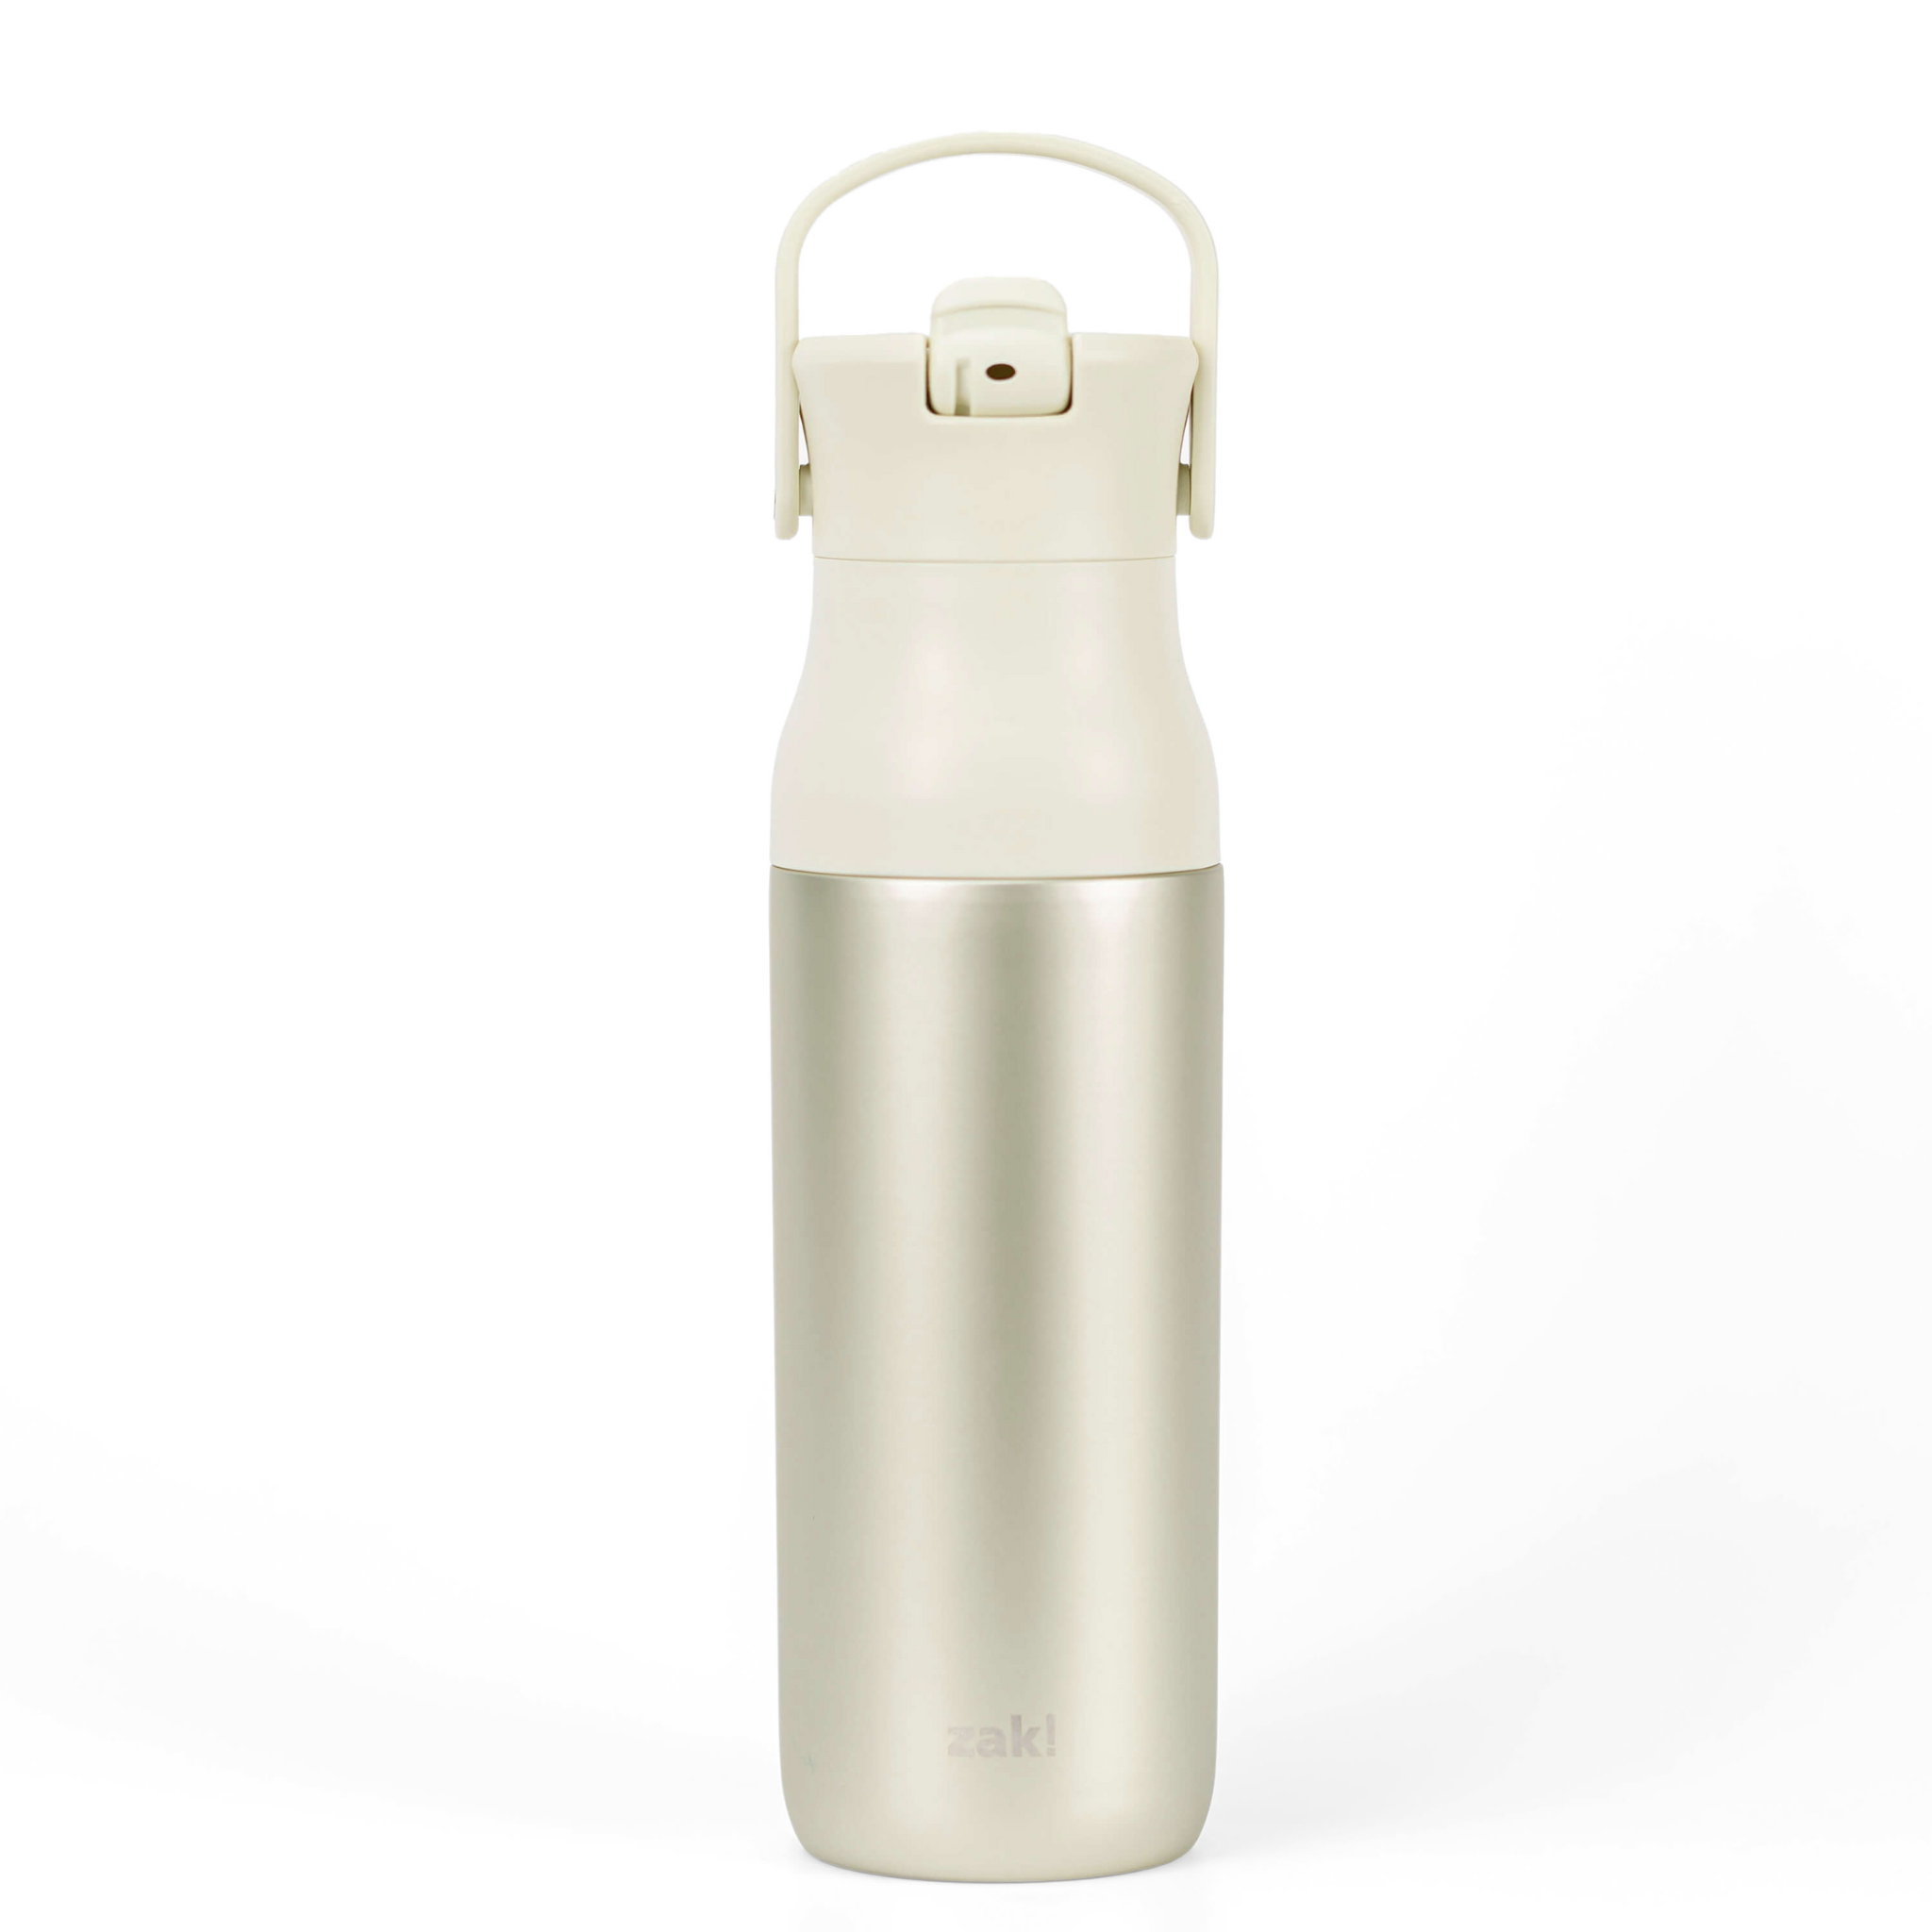 Simple Modern 14 oz Blue and Pink Viacom Insulated Stainless Steel Water Bottle with Straw and Wide Mouth Lid